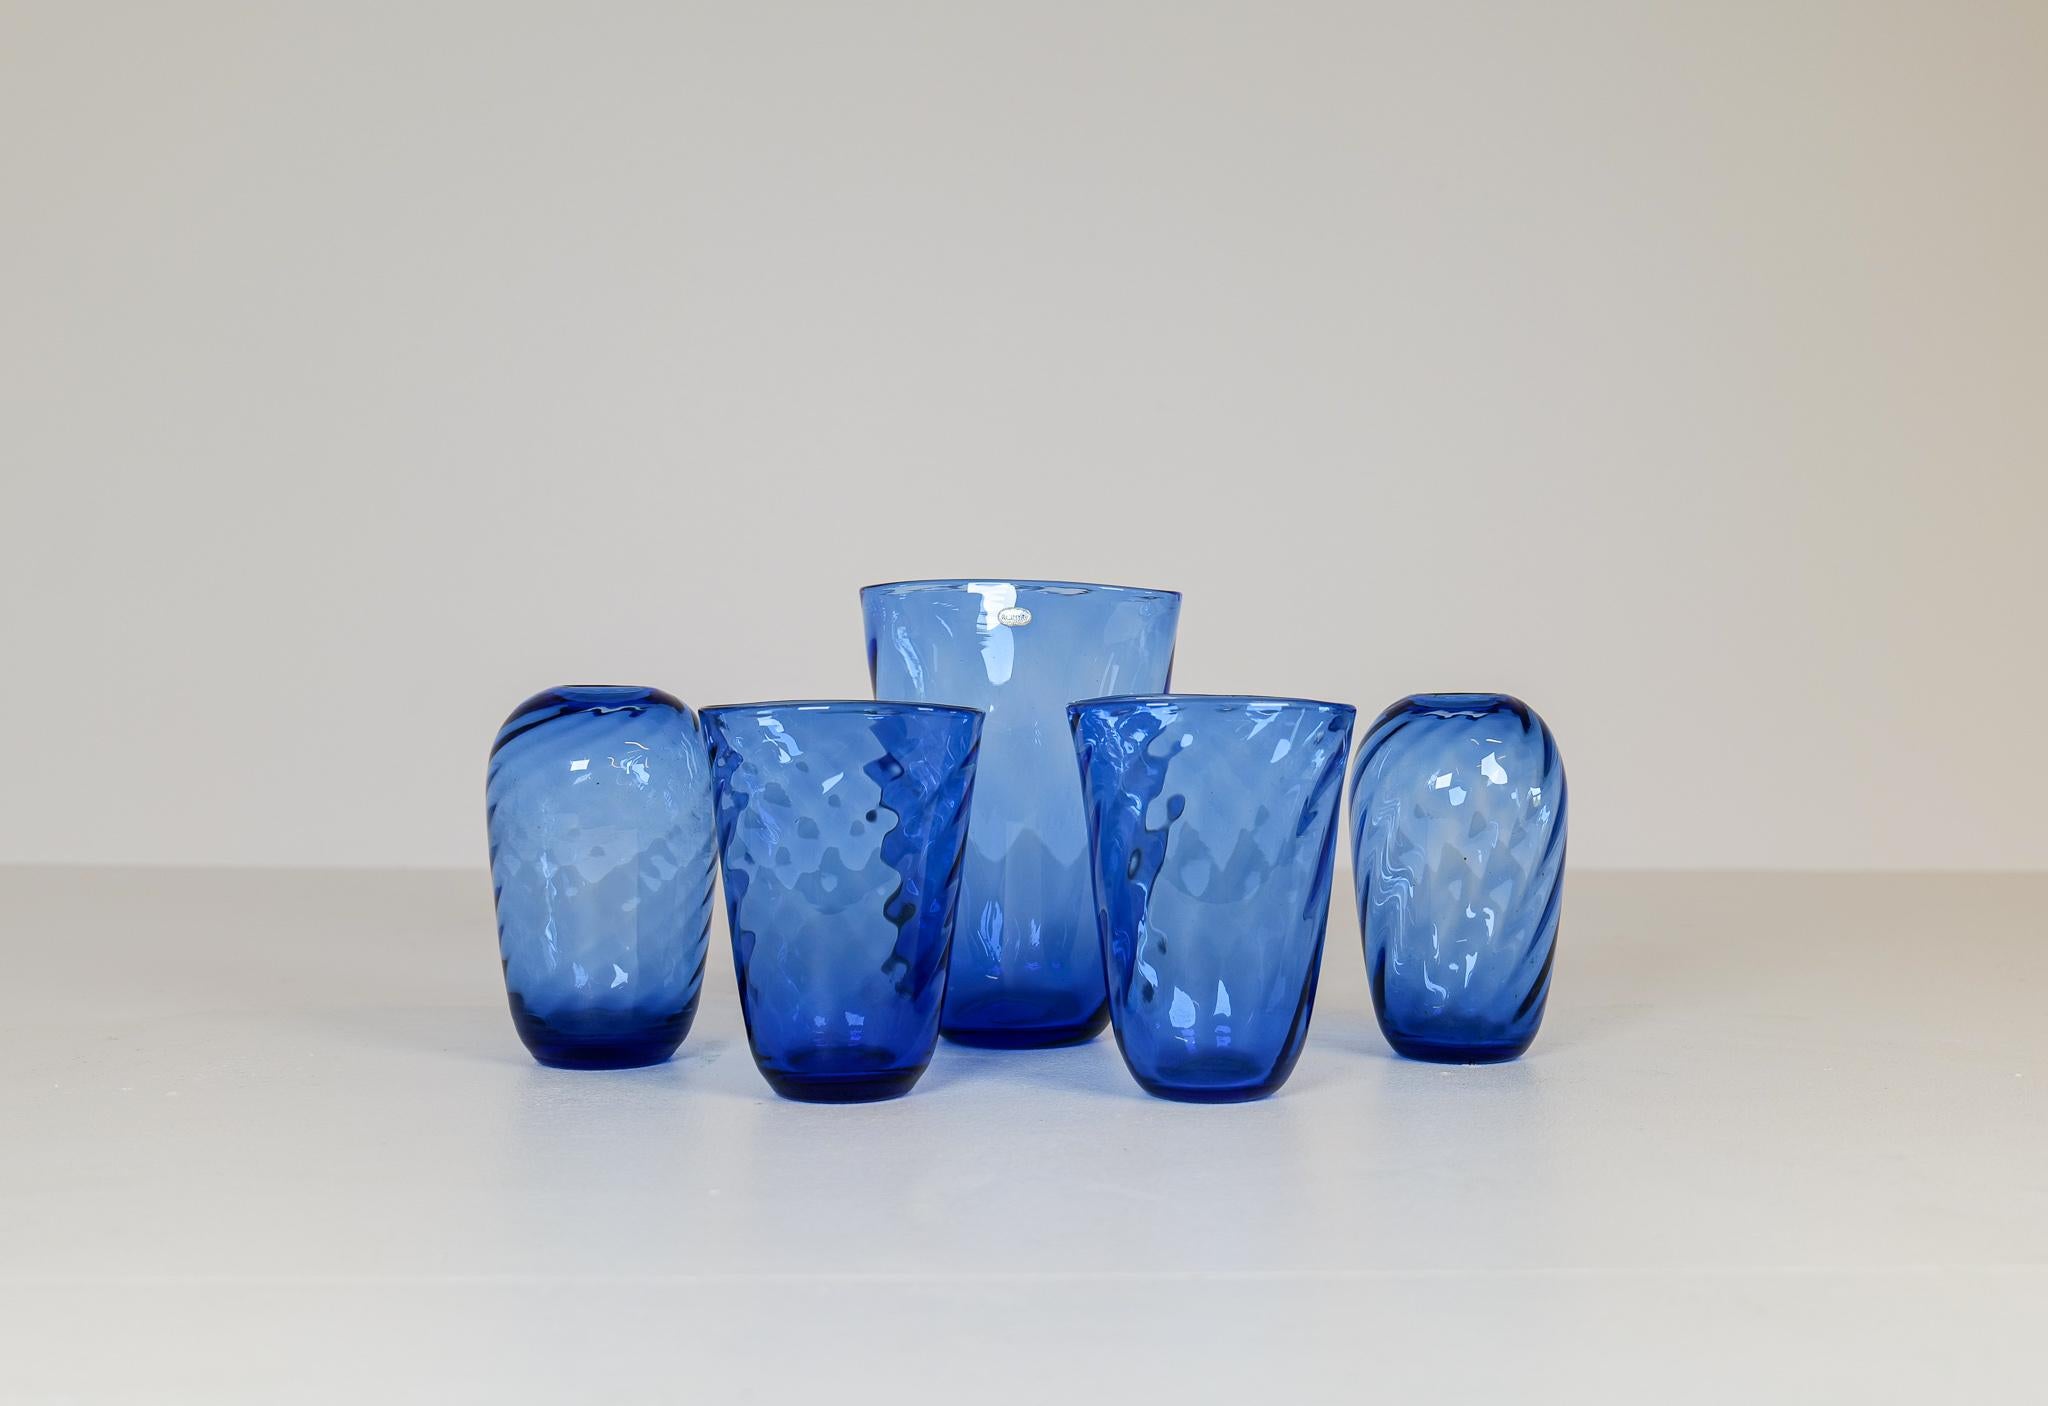 This wonderful turbine driven, blue glass vases was made in Sweden at Reijmyre. Designed by Monica Bratt. Wonderful blue color with that cool look of the glass twisting. All made by hand during the 1937-1942.

Overall good